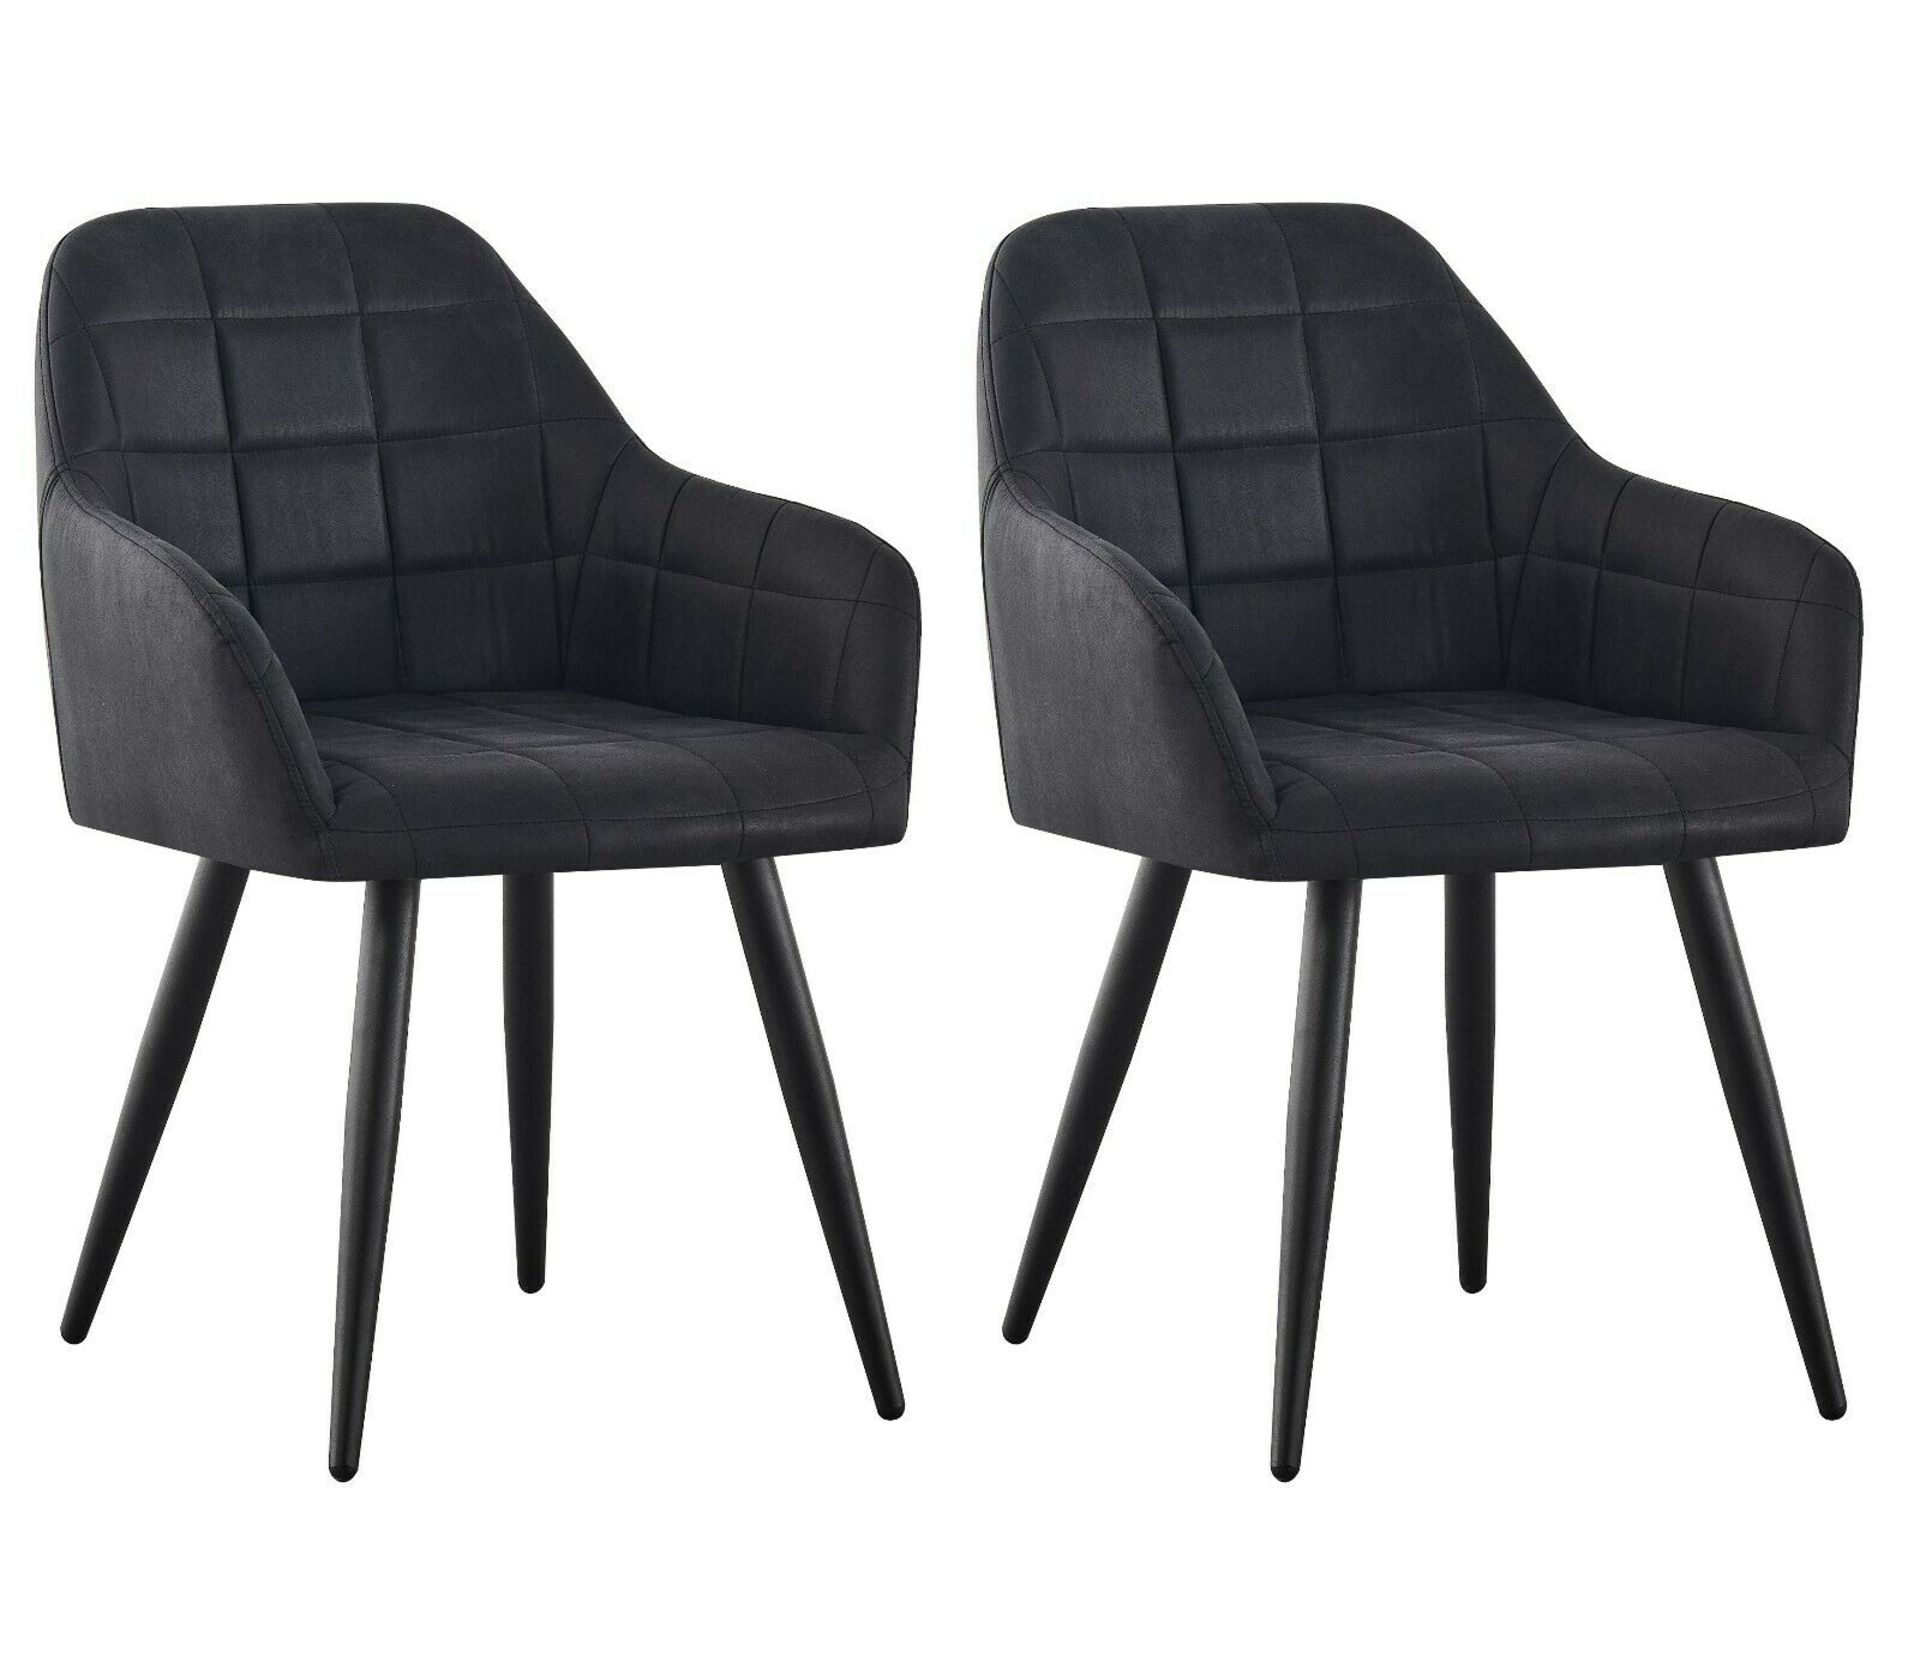 Faux suede leather accent dining chairs